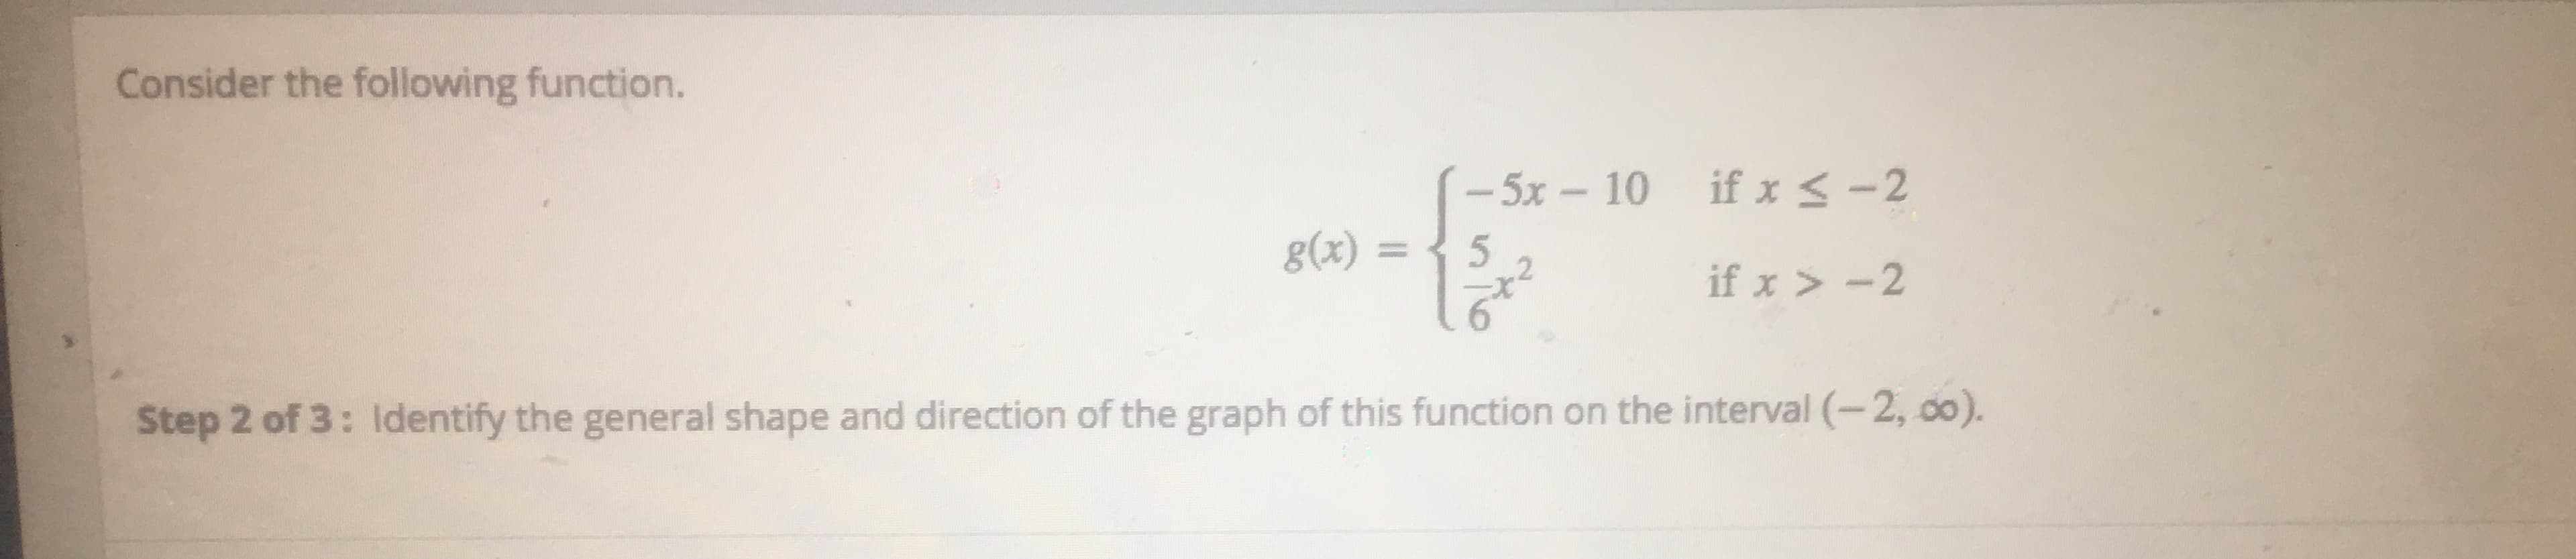 Consider the following function.
-5x- 10 ifx < -2
g(x) =
5
if x > -2
Step 2 of 3: ldentify the general shape and direction of the graph of this function on the interval (-2, do).
